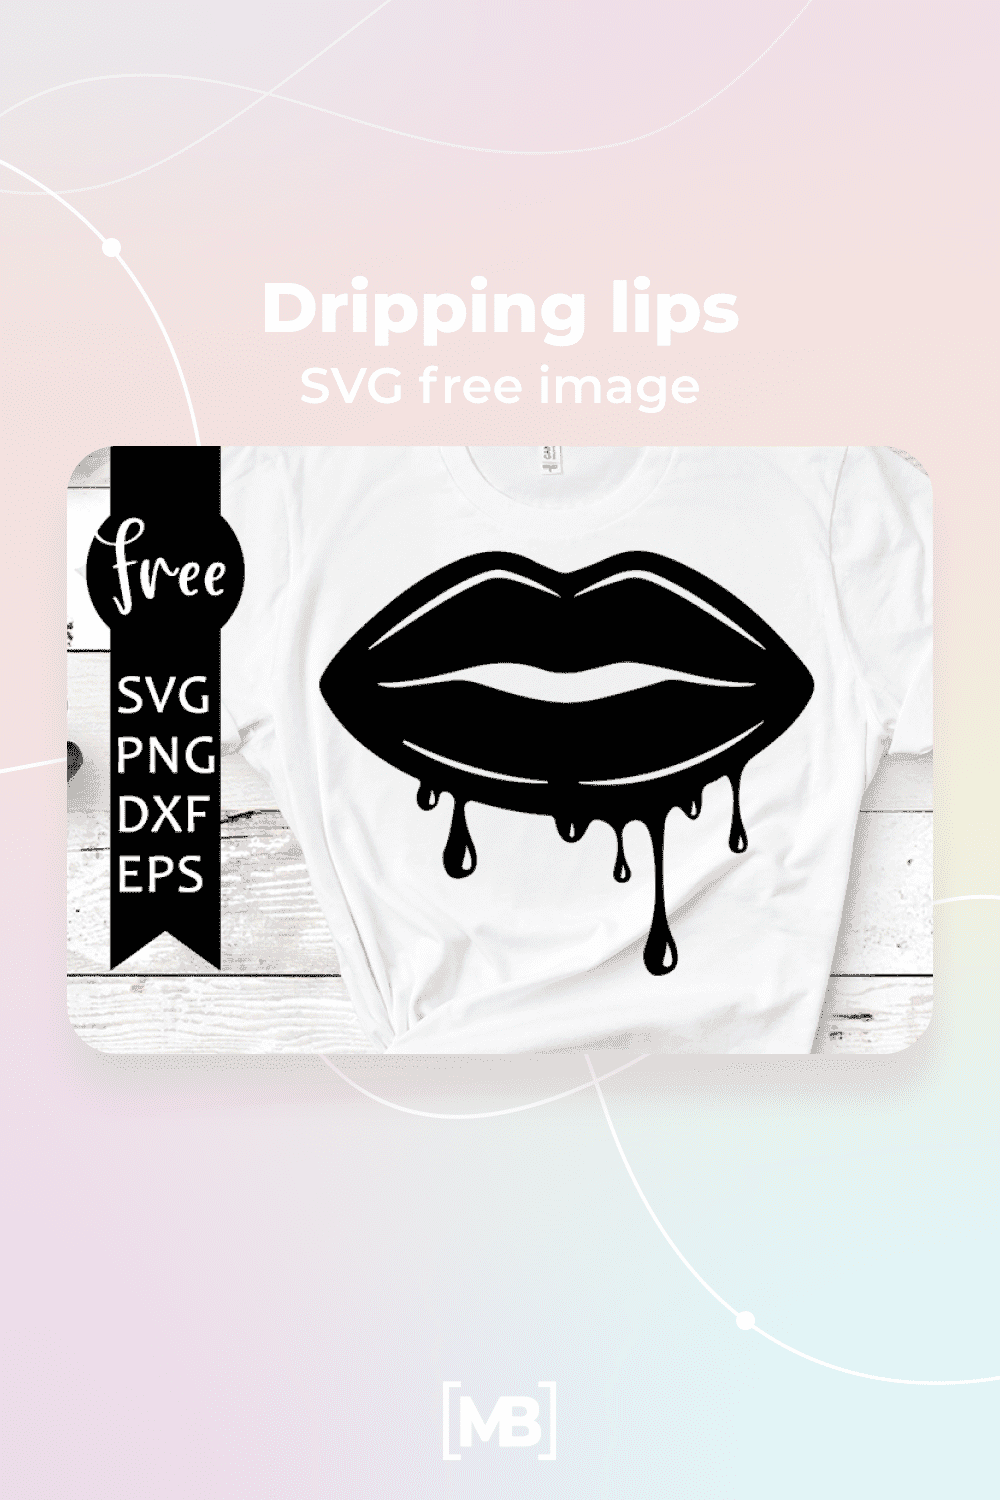 Dripping lips svg free image.